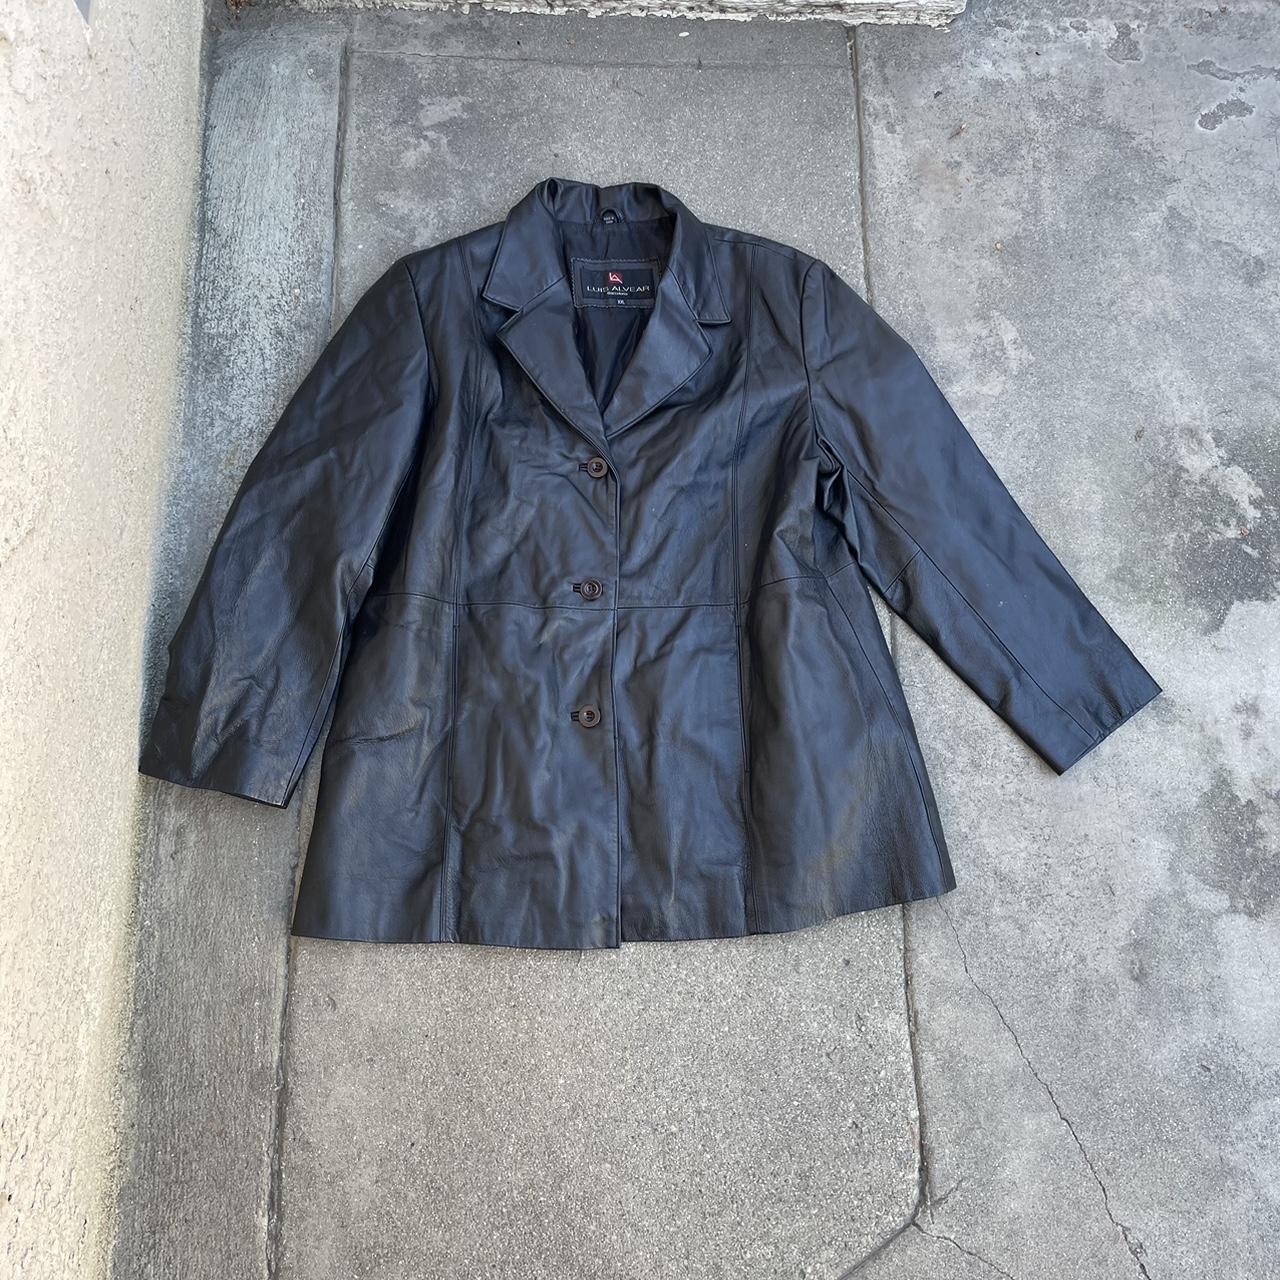 Luis Alvear Leather Jacket XXL All offers accepted - Depop